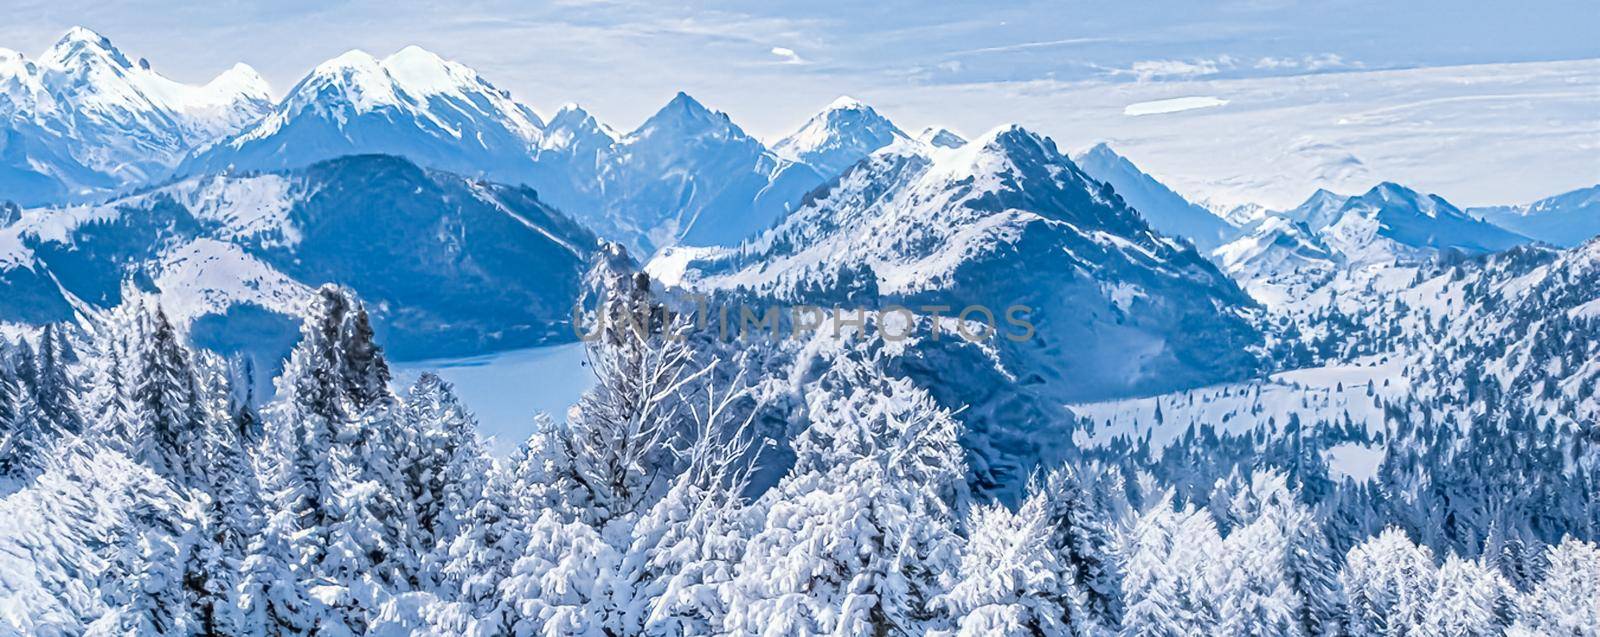 Winter wonderland and magical Christmas landscape. Snowy mountains and forest covered with snow as holiday background.